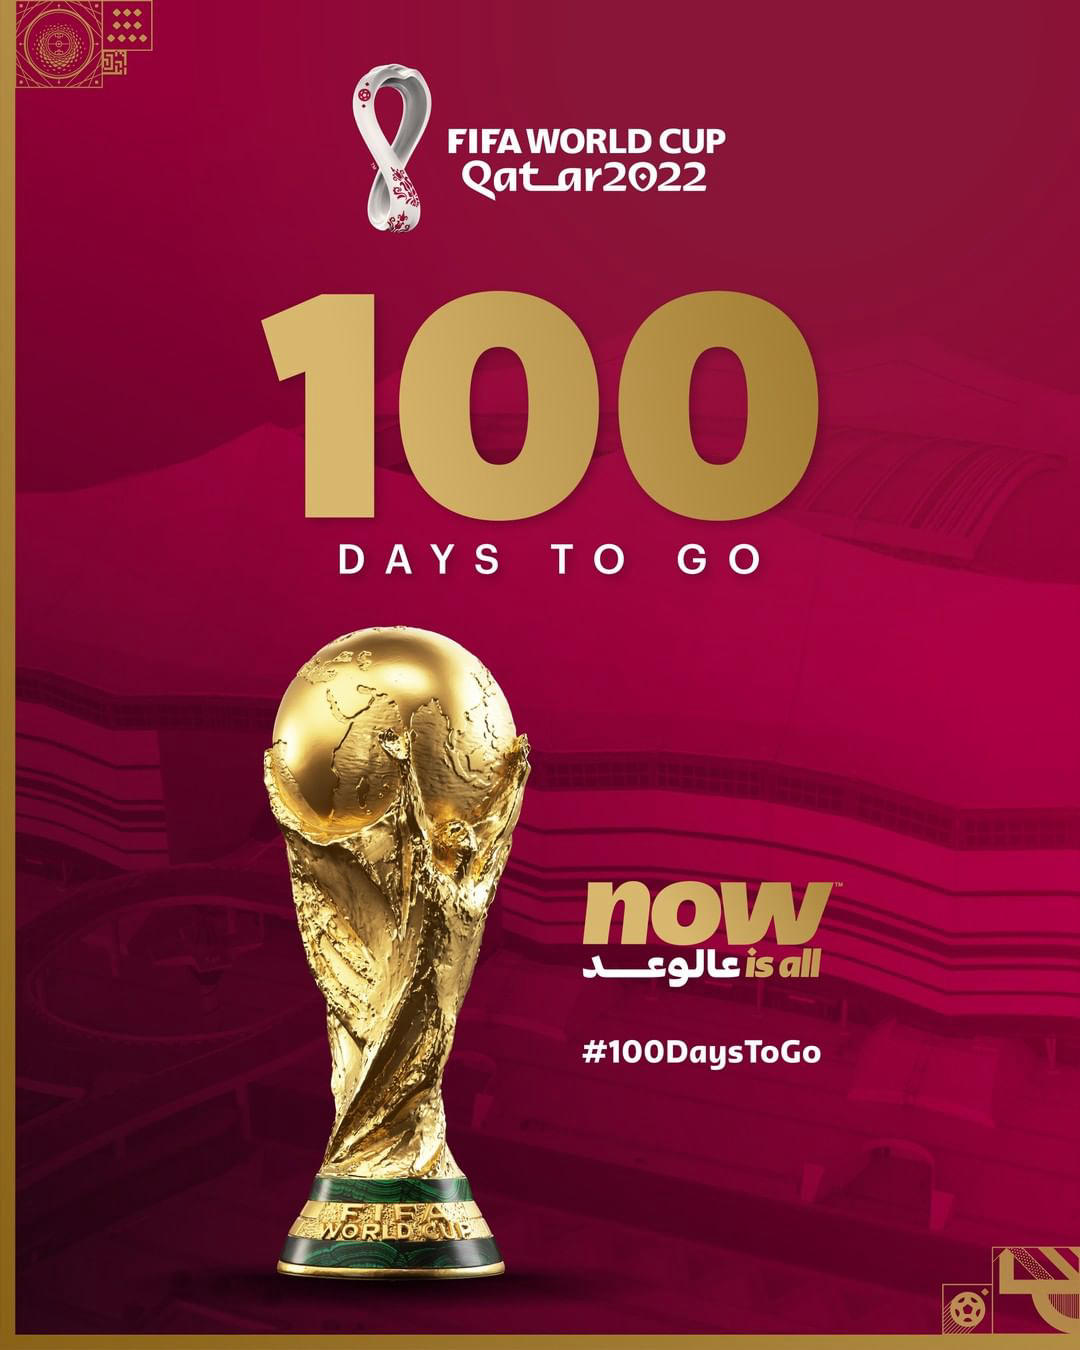 FIFA World Cup - It's #100DaysToGo